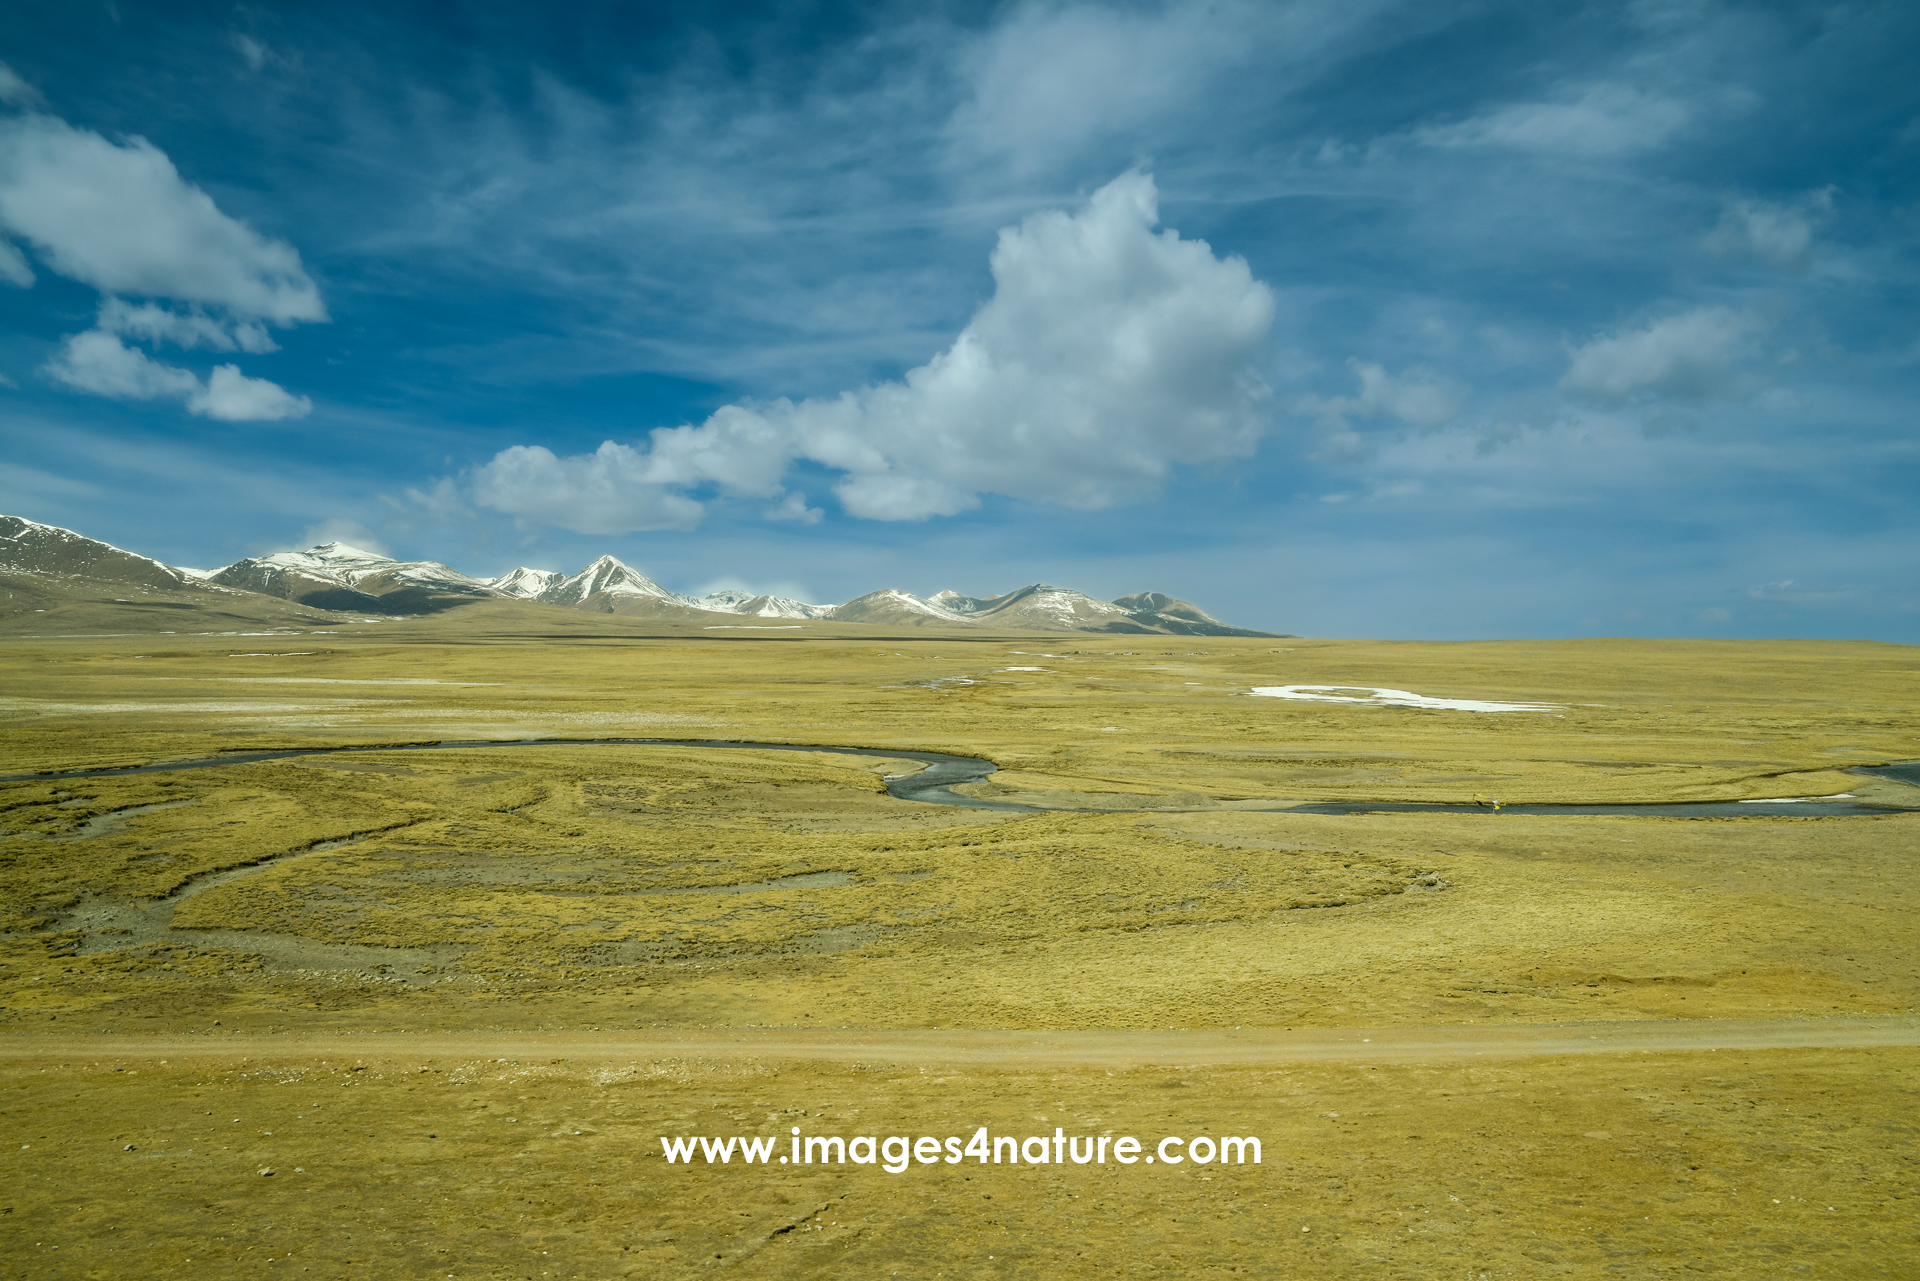 Qinghai-Tibet plateau landscape in winter with grasslands, snow-covered peaks and a river